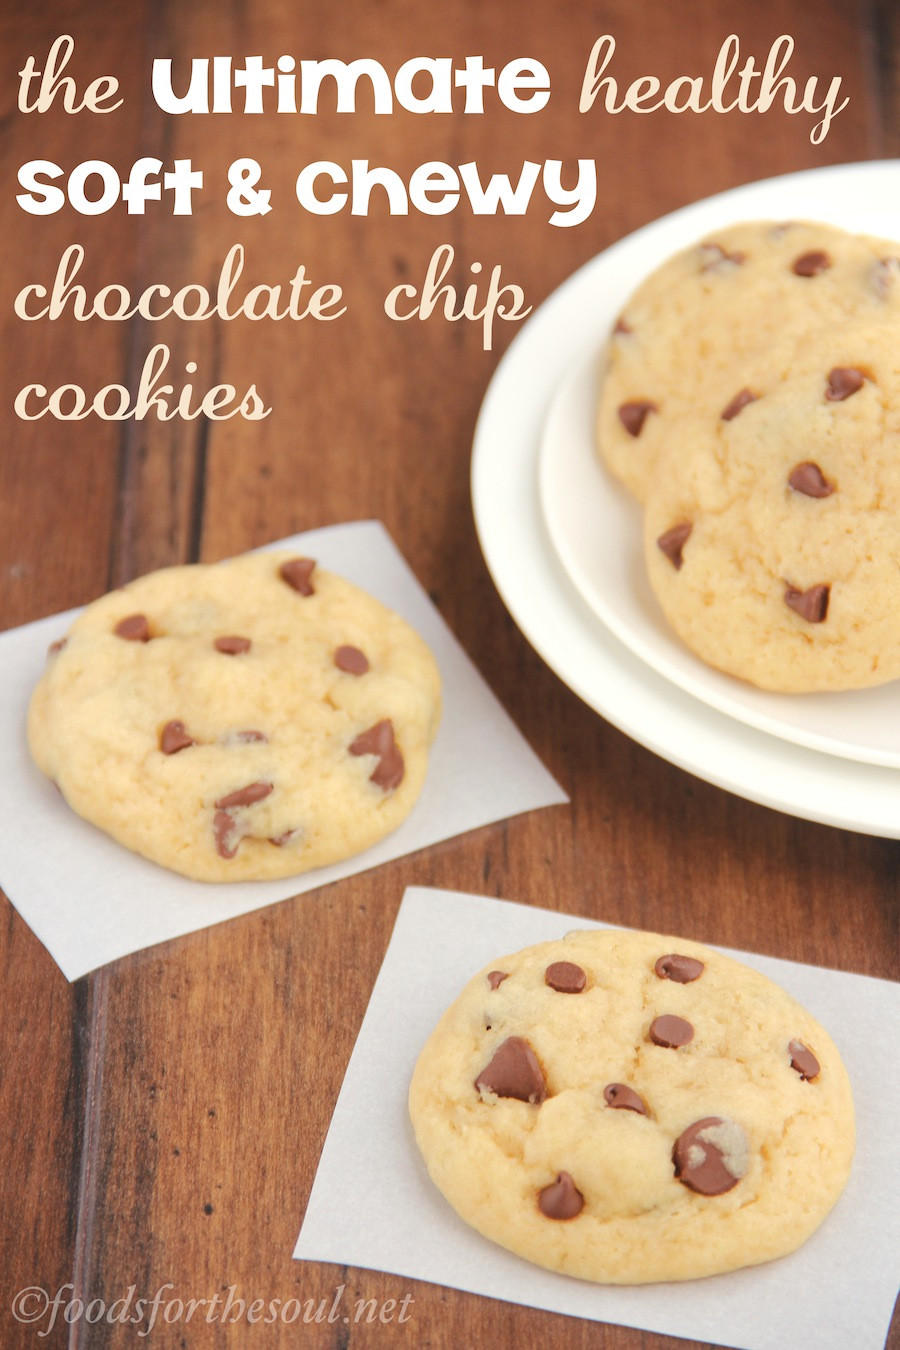 Healthy Cookies Recipe Low Calorie
 The Ultimate Healthy Soft & Chewy Chocolate Chip Cookies